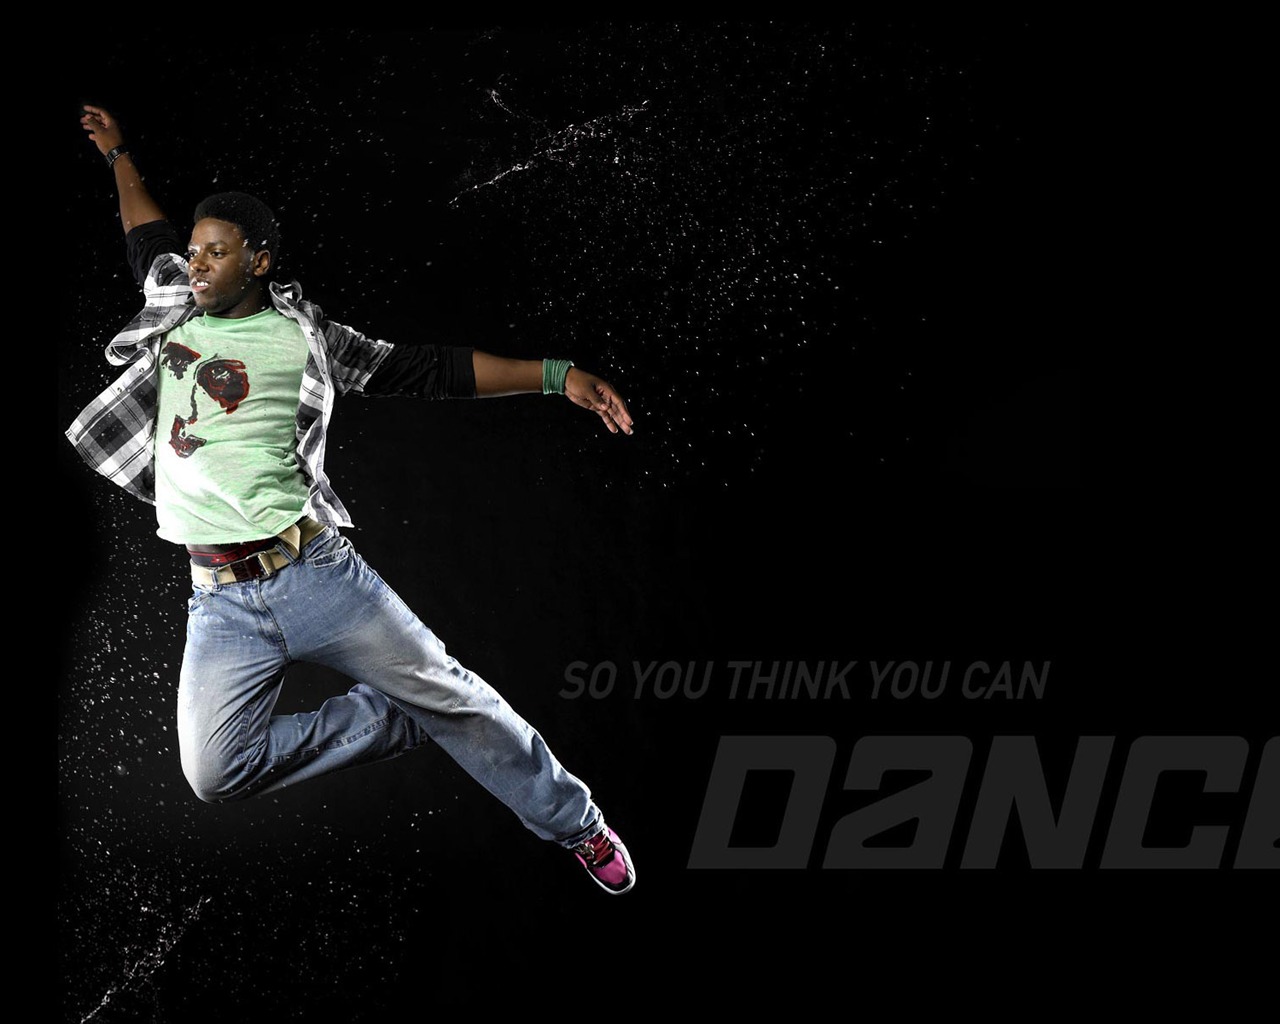 So You Think You Can Dance wallpaper (1) #18 - 1280x1024